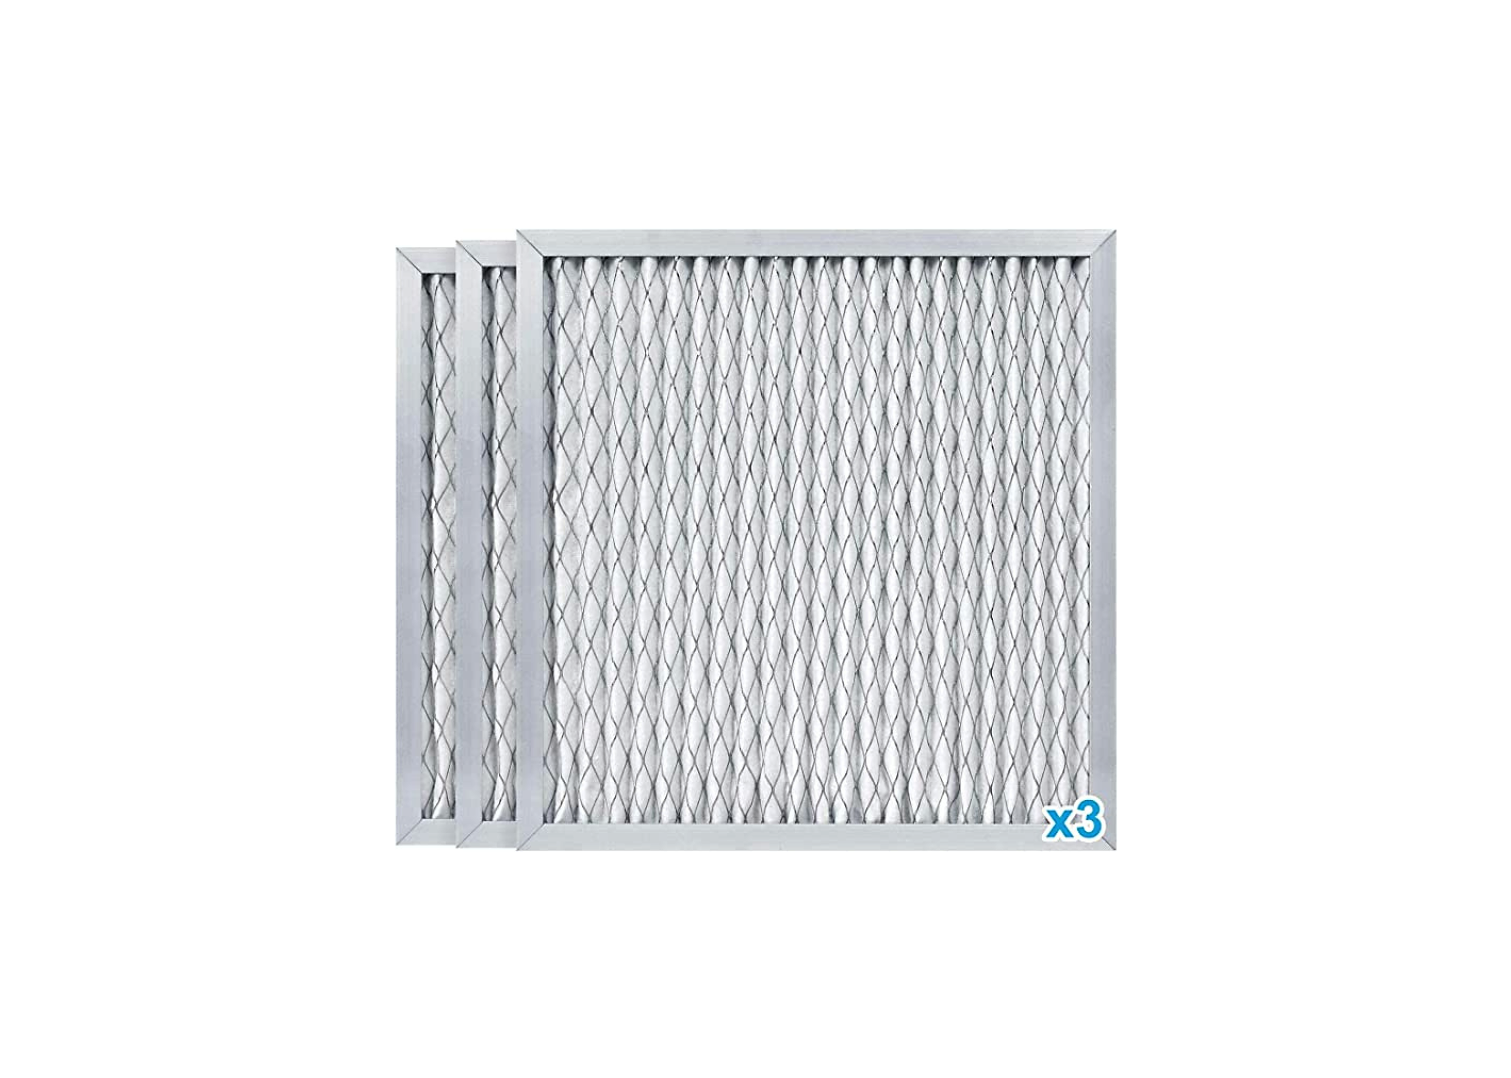 MERV 8 Replacement Filter For LGR1250, LGR1250X & SLGR1250X Dehumidifiers 3 PACK